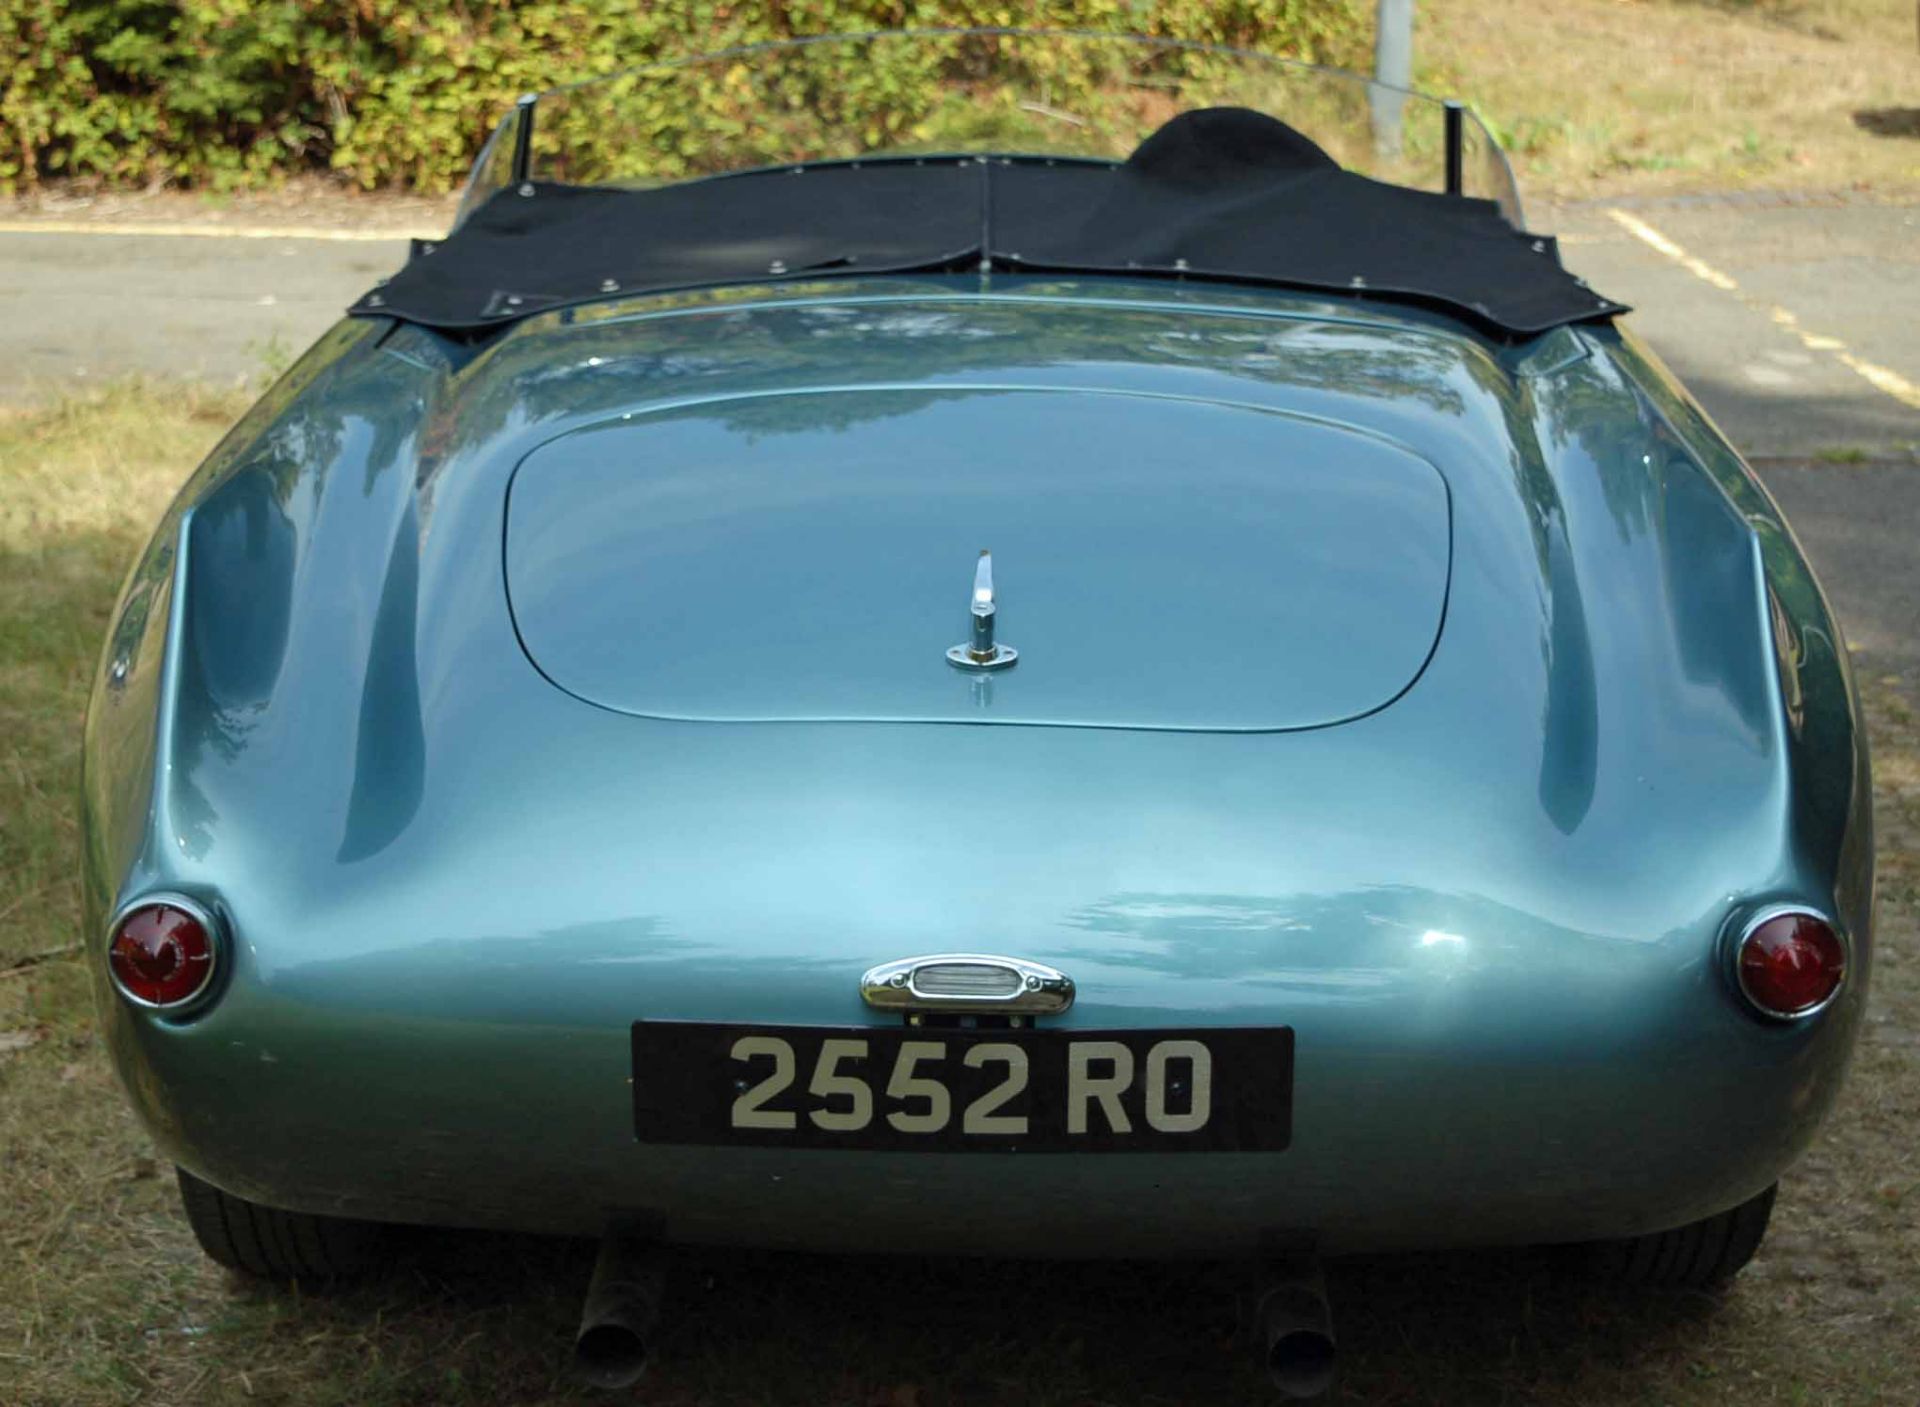 The 1964 Bristol 409 Bullet Speedster. The original Bullet, this car started life as a Bristol 409 - Image 6 of 17